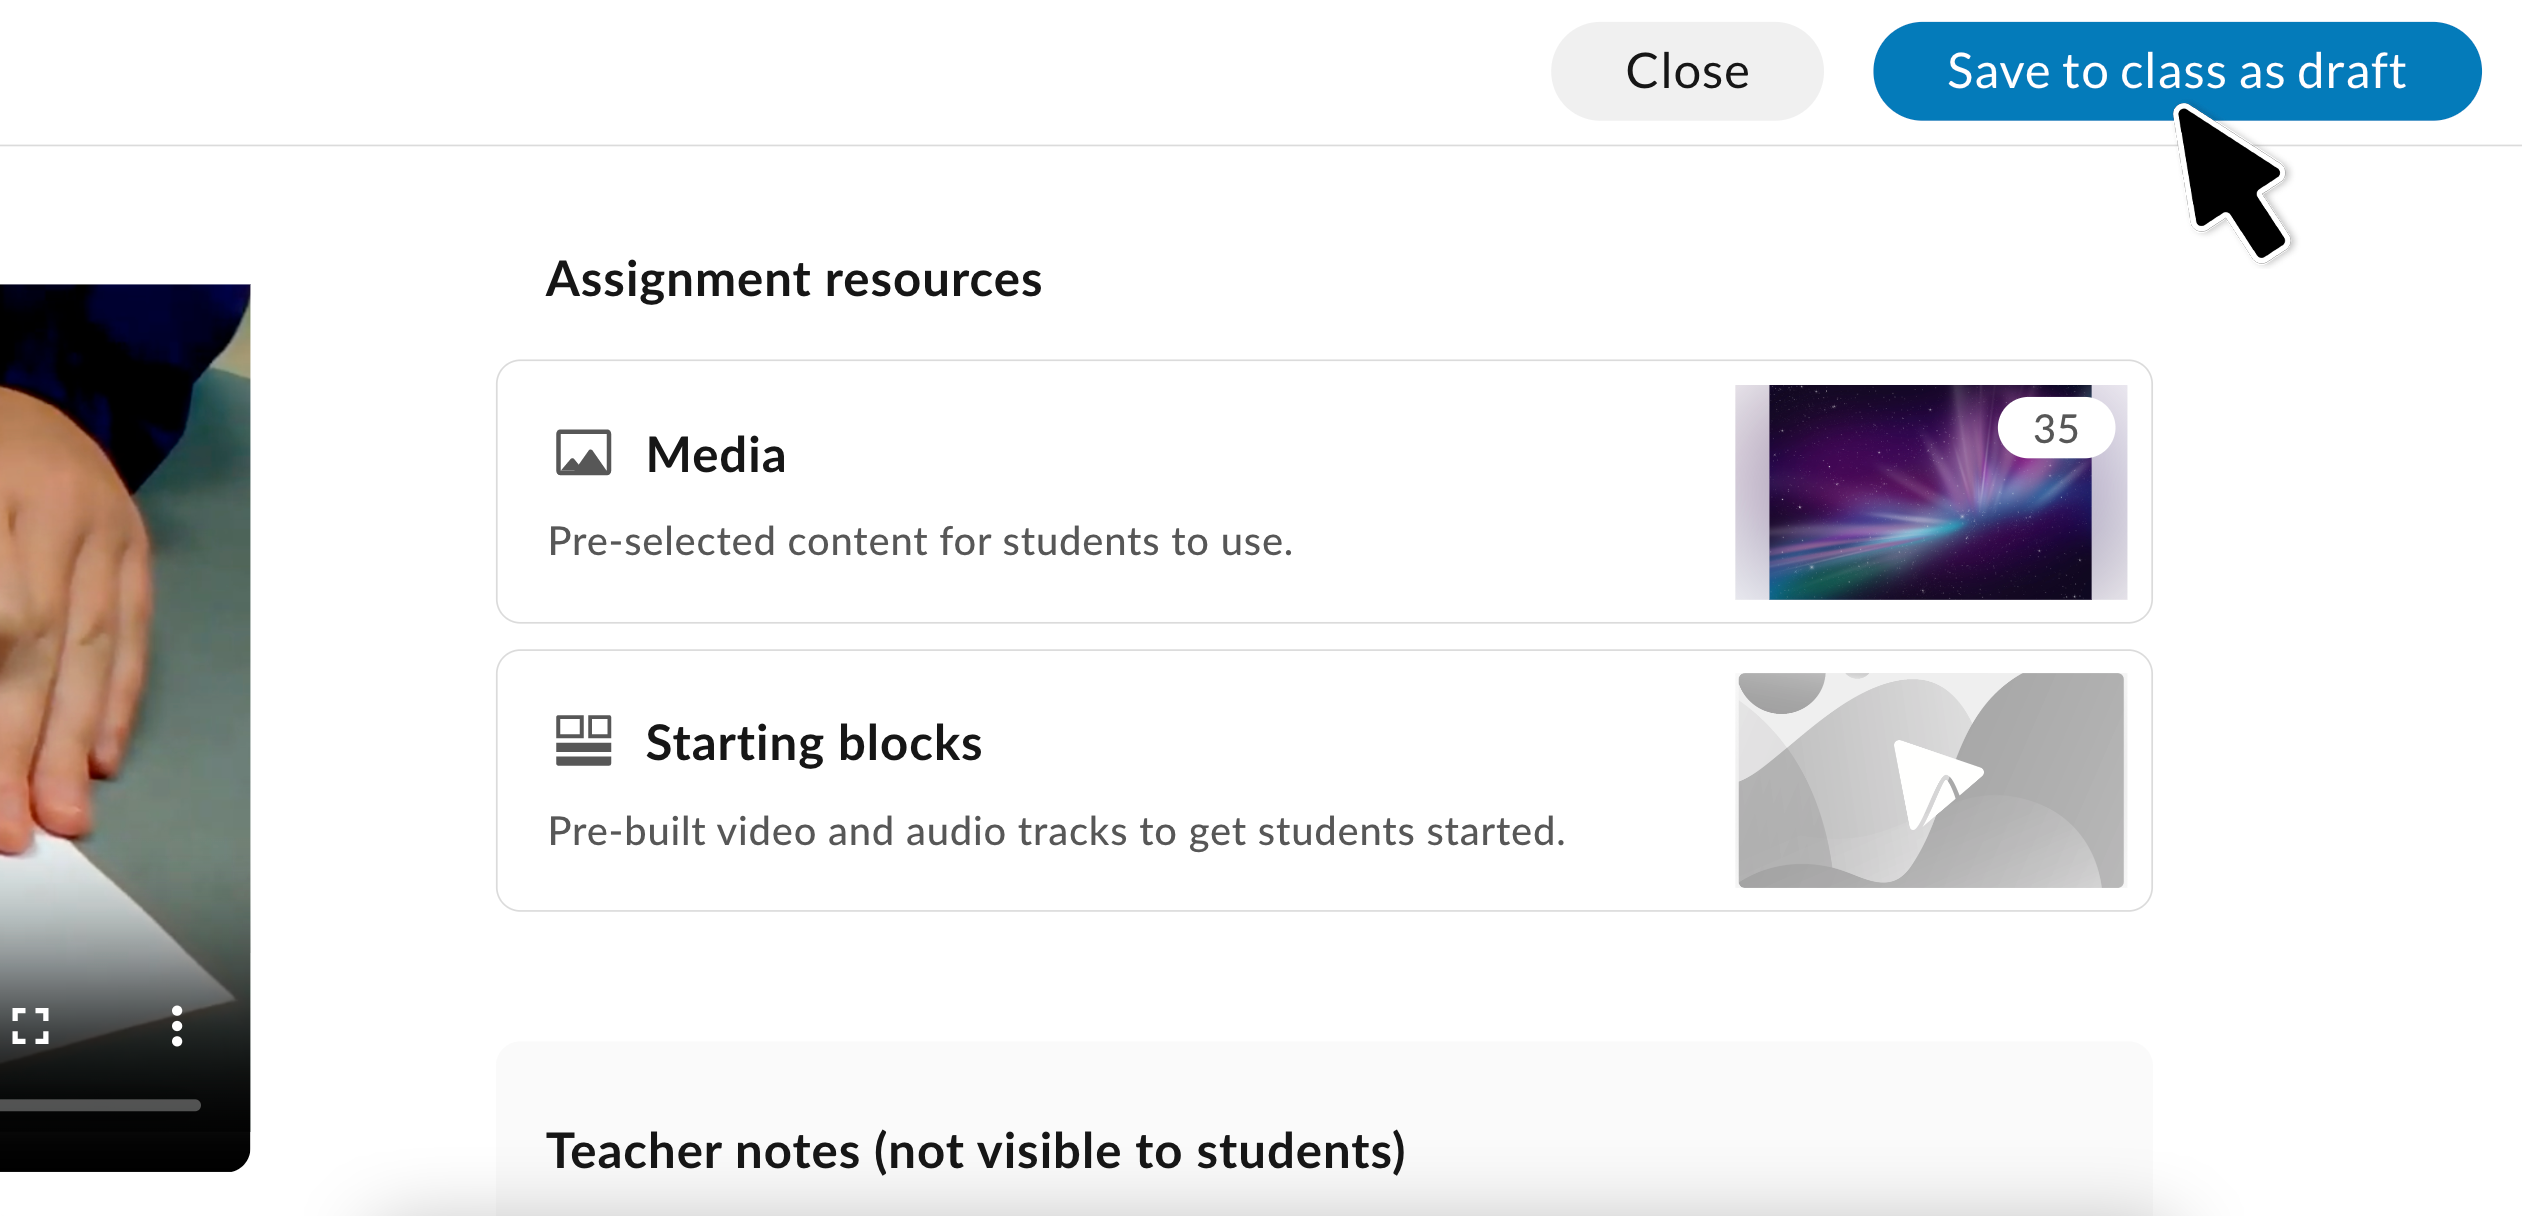 Saving an Assignment idea lesson plan to a Class in WeVideo's Classroom space.